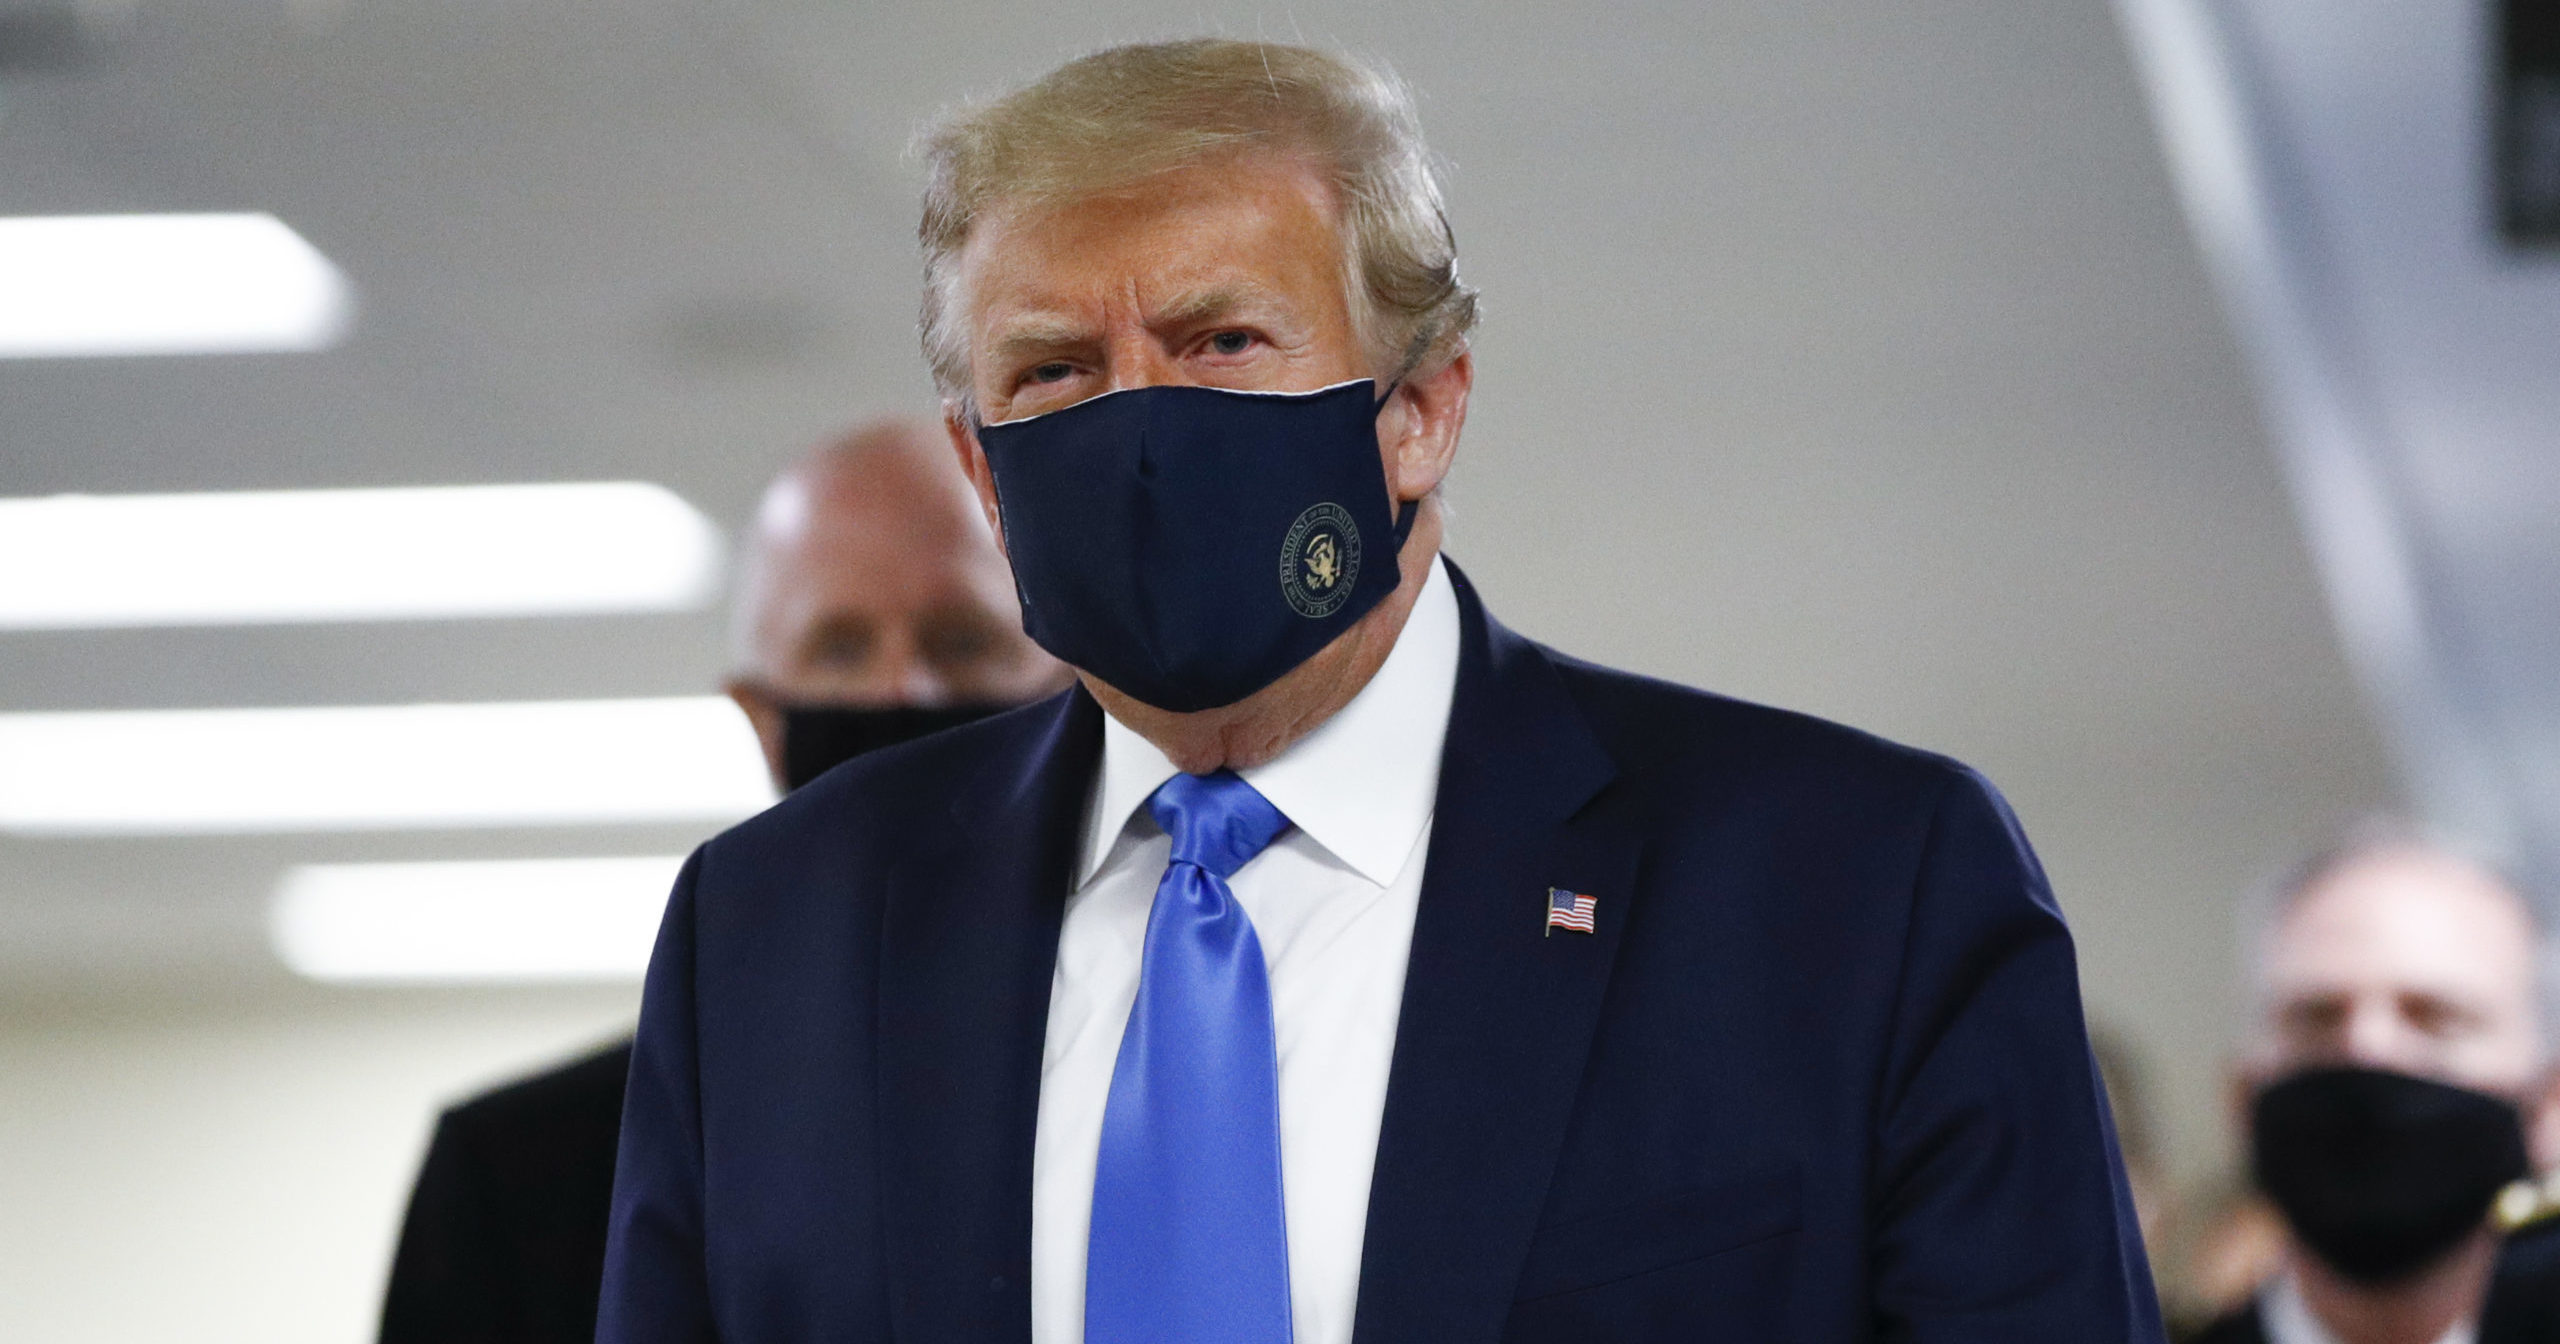 President Donald Trump wears a mask as he walks down the hallway during his visit to Walter Reed National Military Medical Center in Bethesda, Maryland, on July 11, 2020.